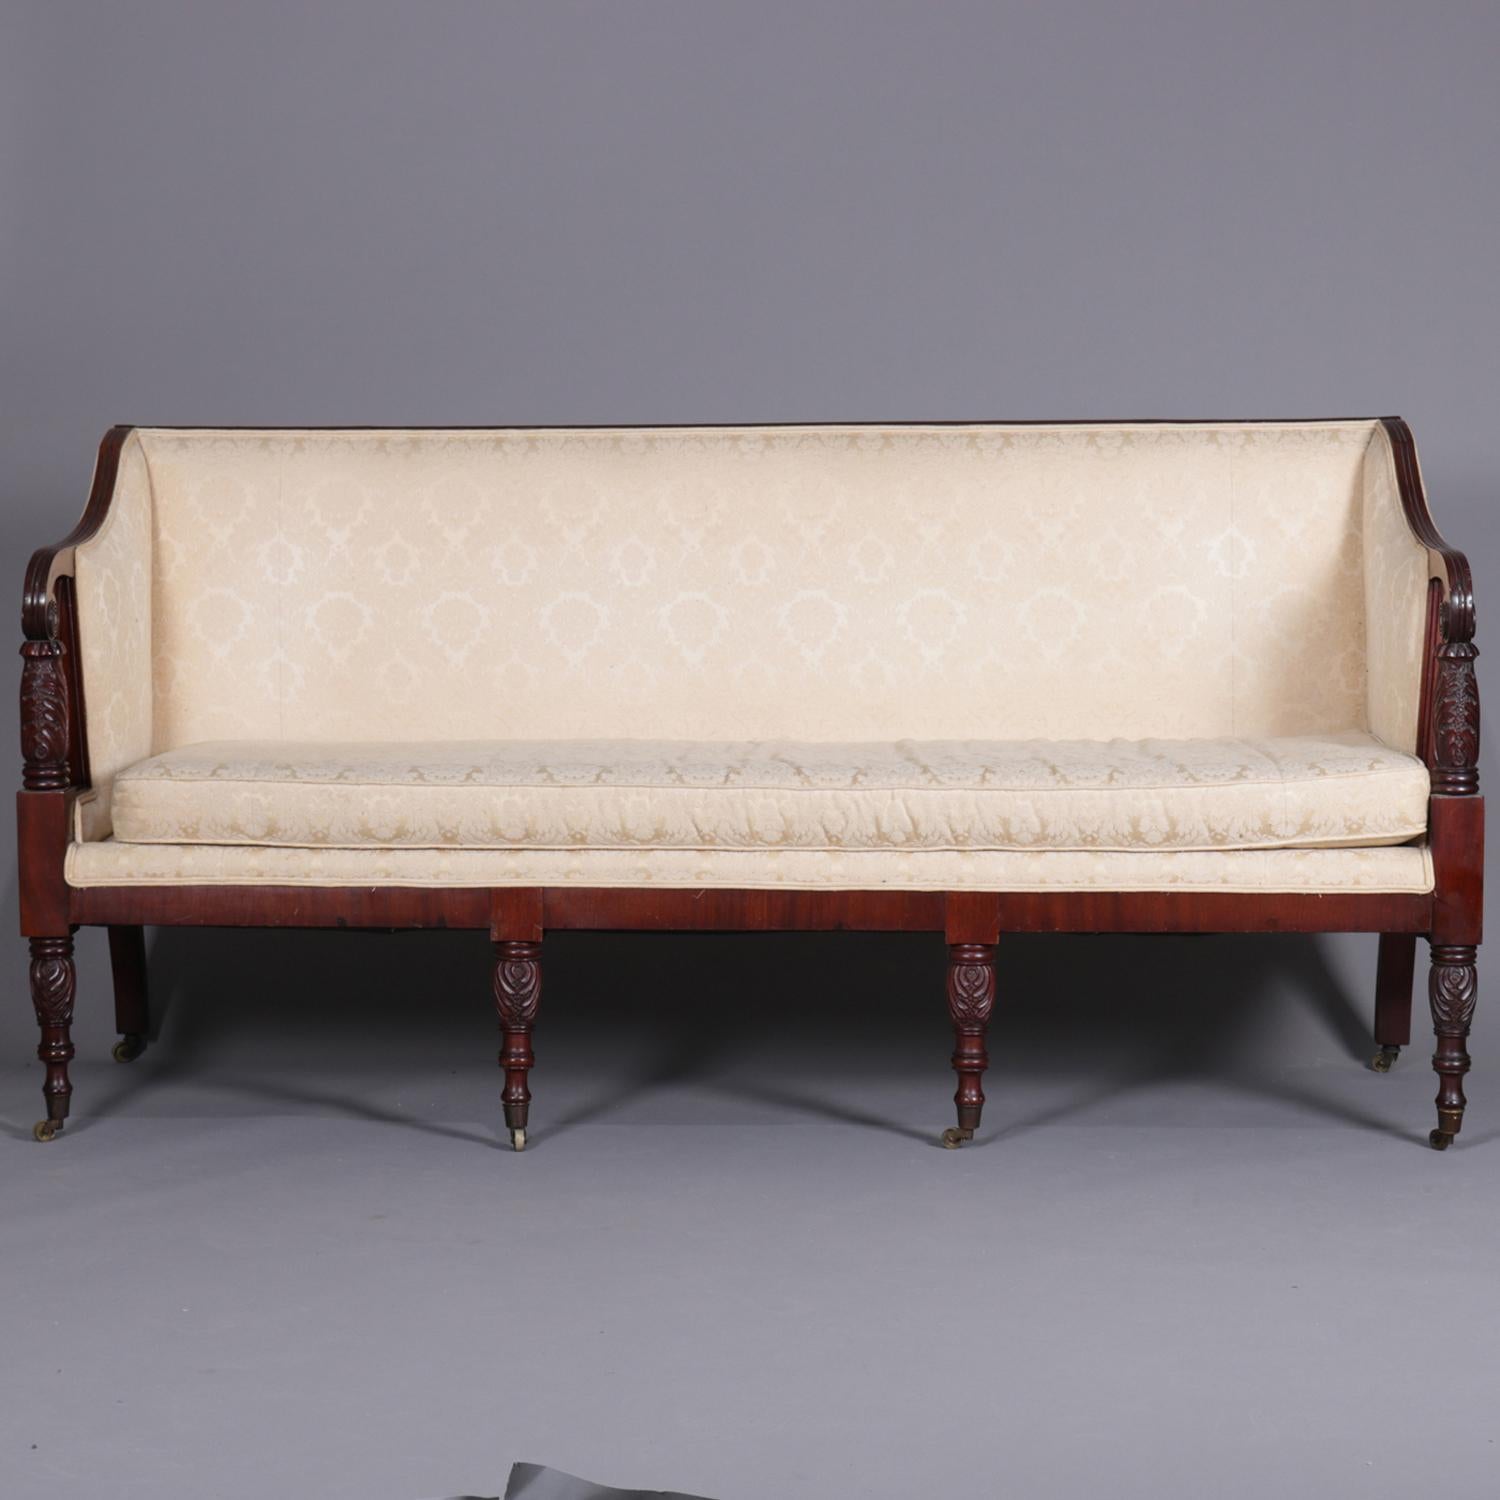 An antique period Sheraton classical Samuel McIntire School sofa features mahogany frame with scroll form open arms having central rosettes over foliate carved columns, raised on turned and foliate carved legs terminating in casters, newer